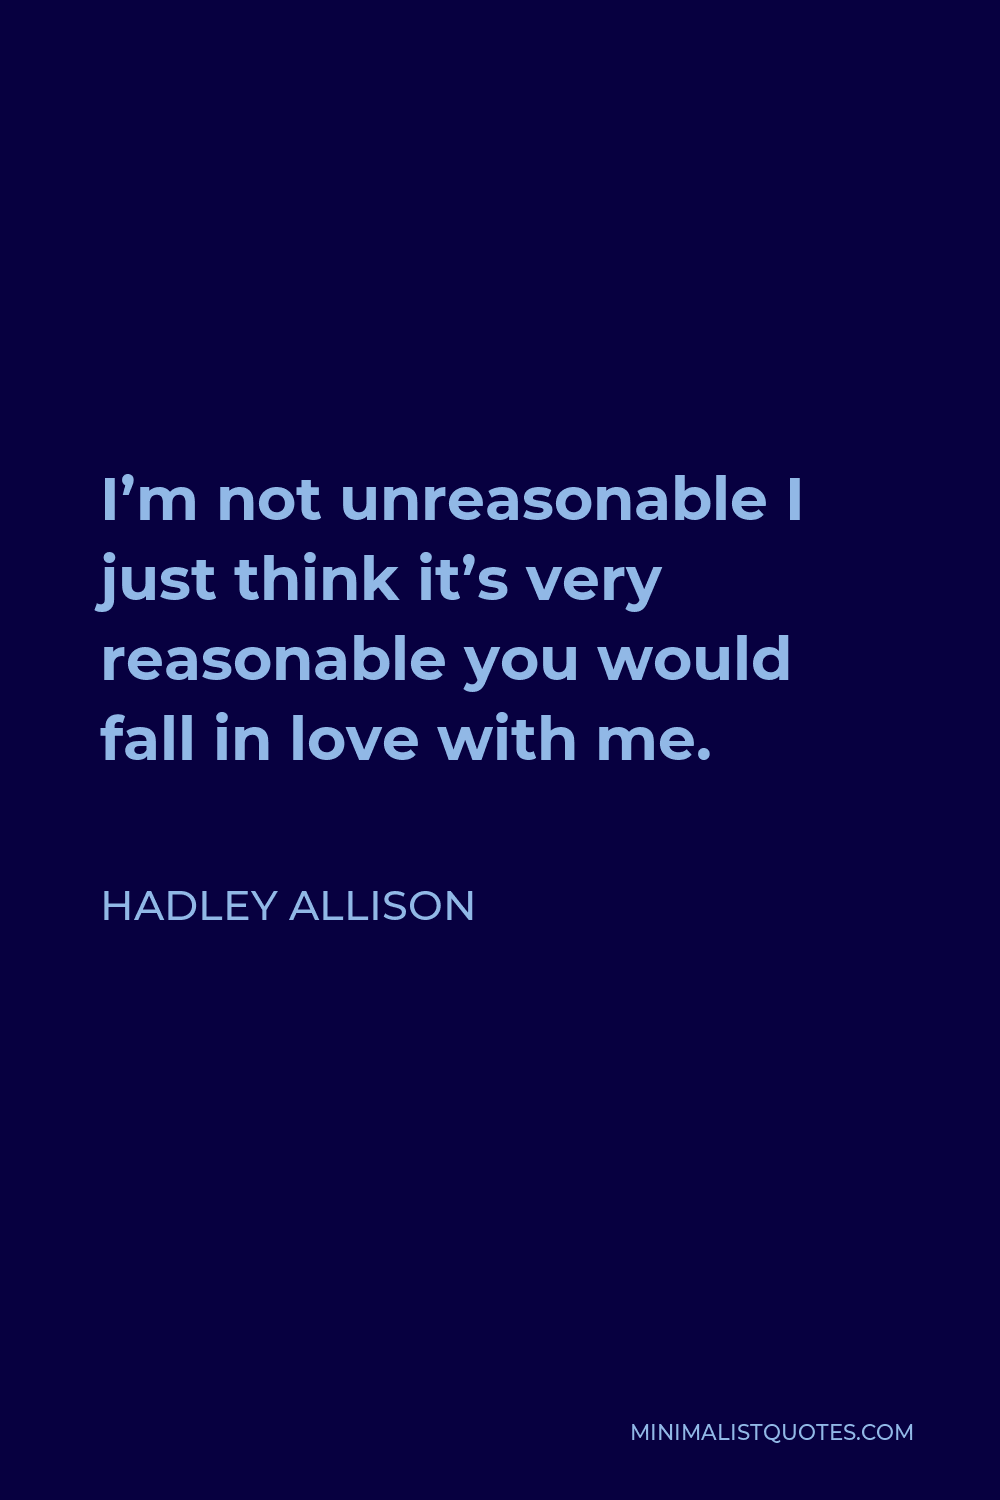 Hadley Allison Quote - I’m not unreasonable I just think it’s very reasonable you would fall in love with me.